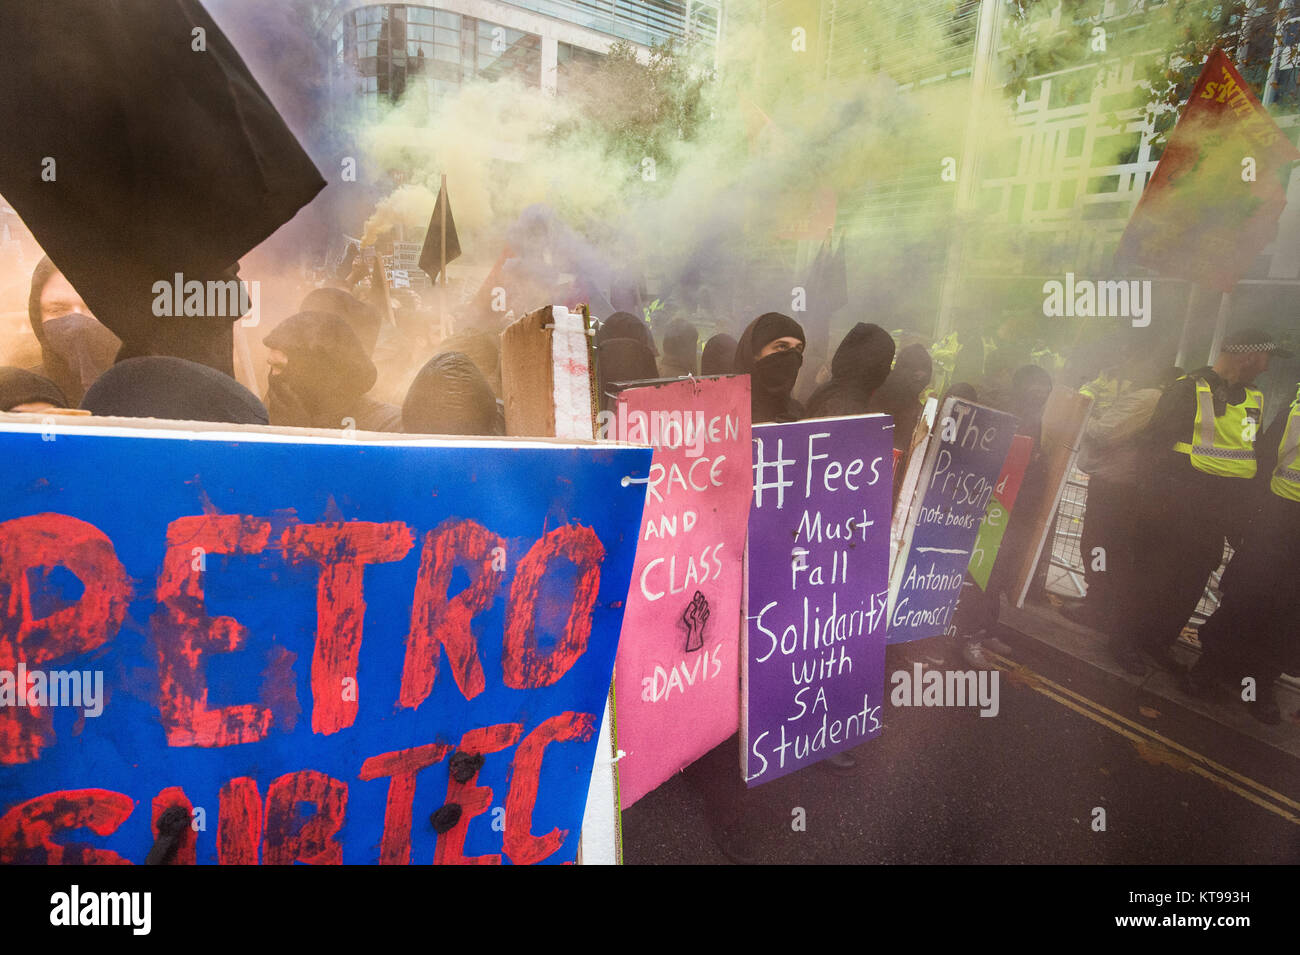 The autonomous bloc on the student march let off flares and threw objects at the police guarding the Home Office. They called for an end to the UK's racist immigration policies aned shameful treatment of refugees and asylum seekers. Stock Photo